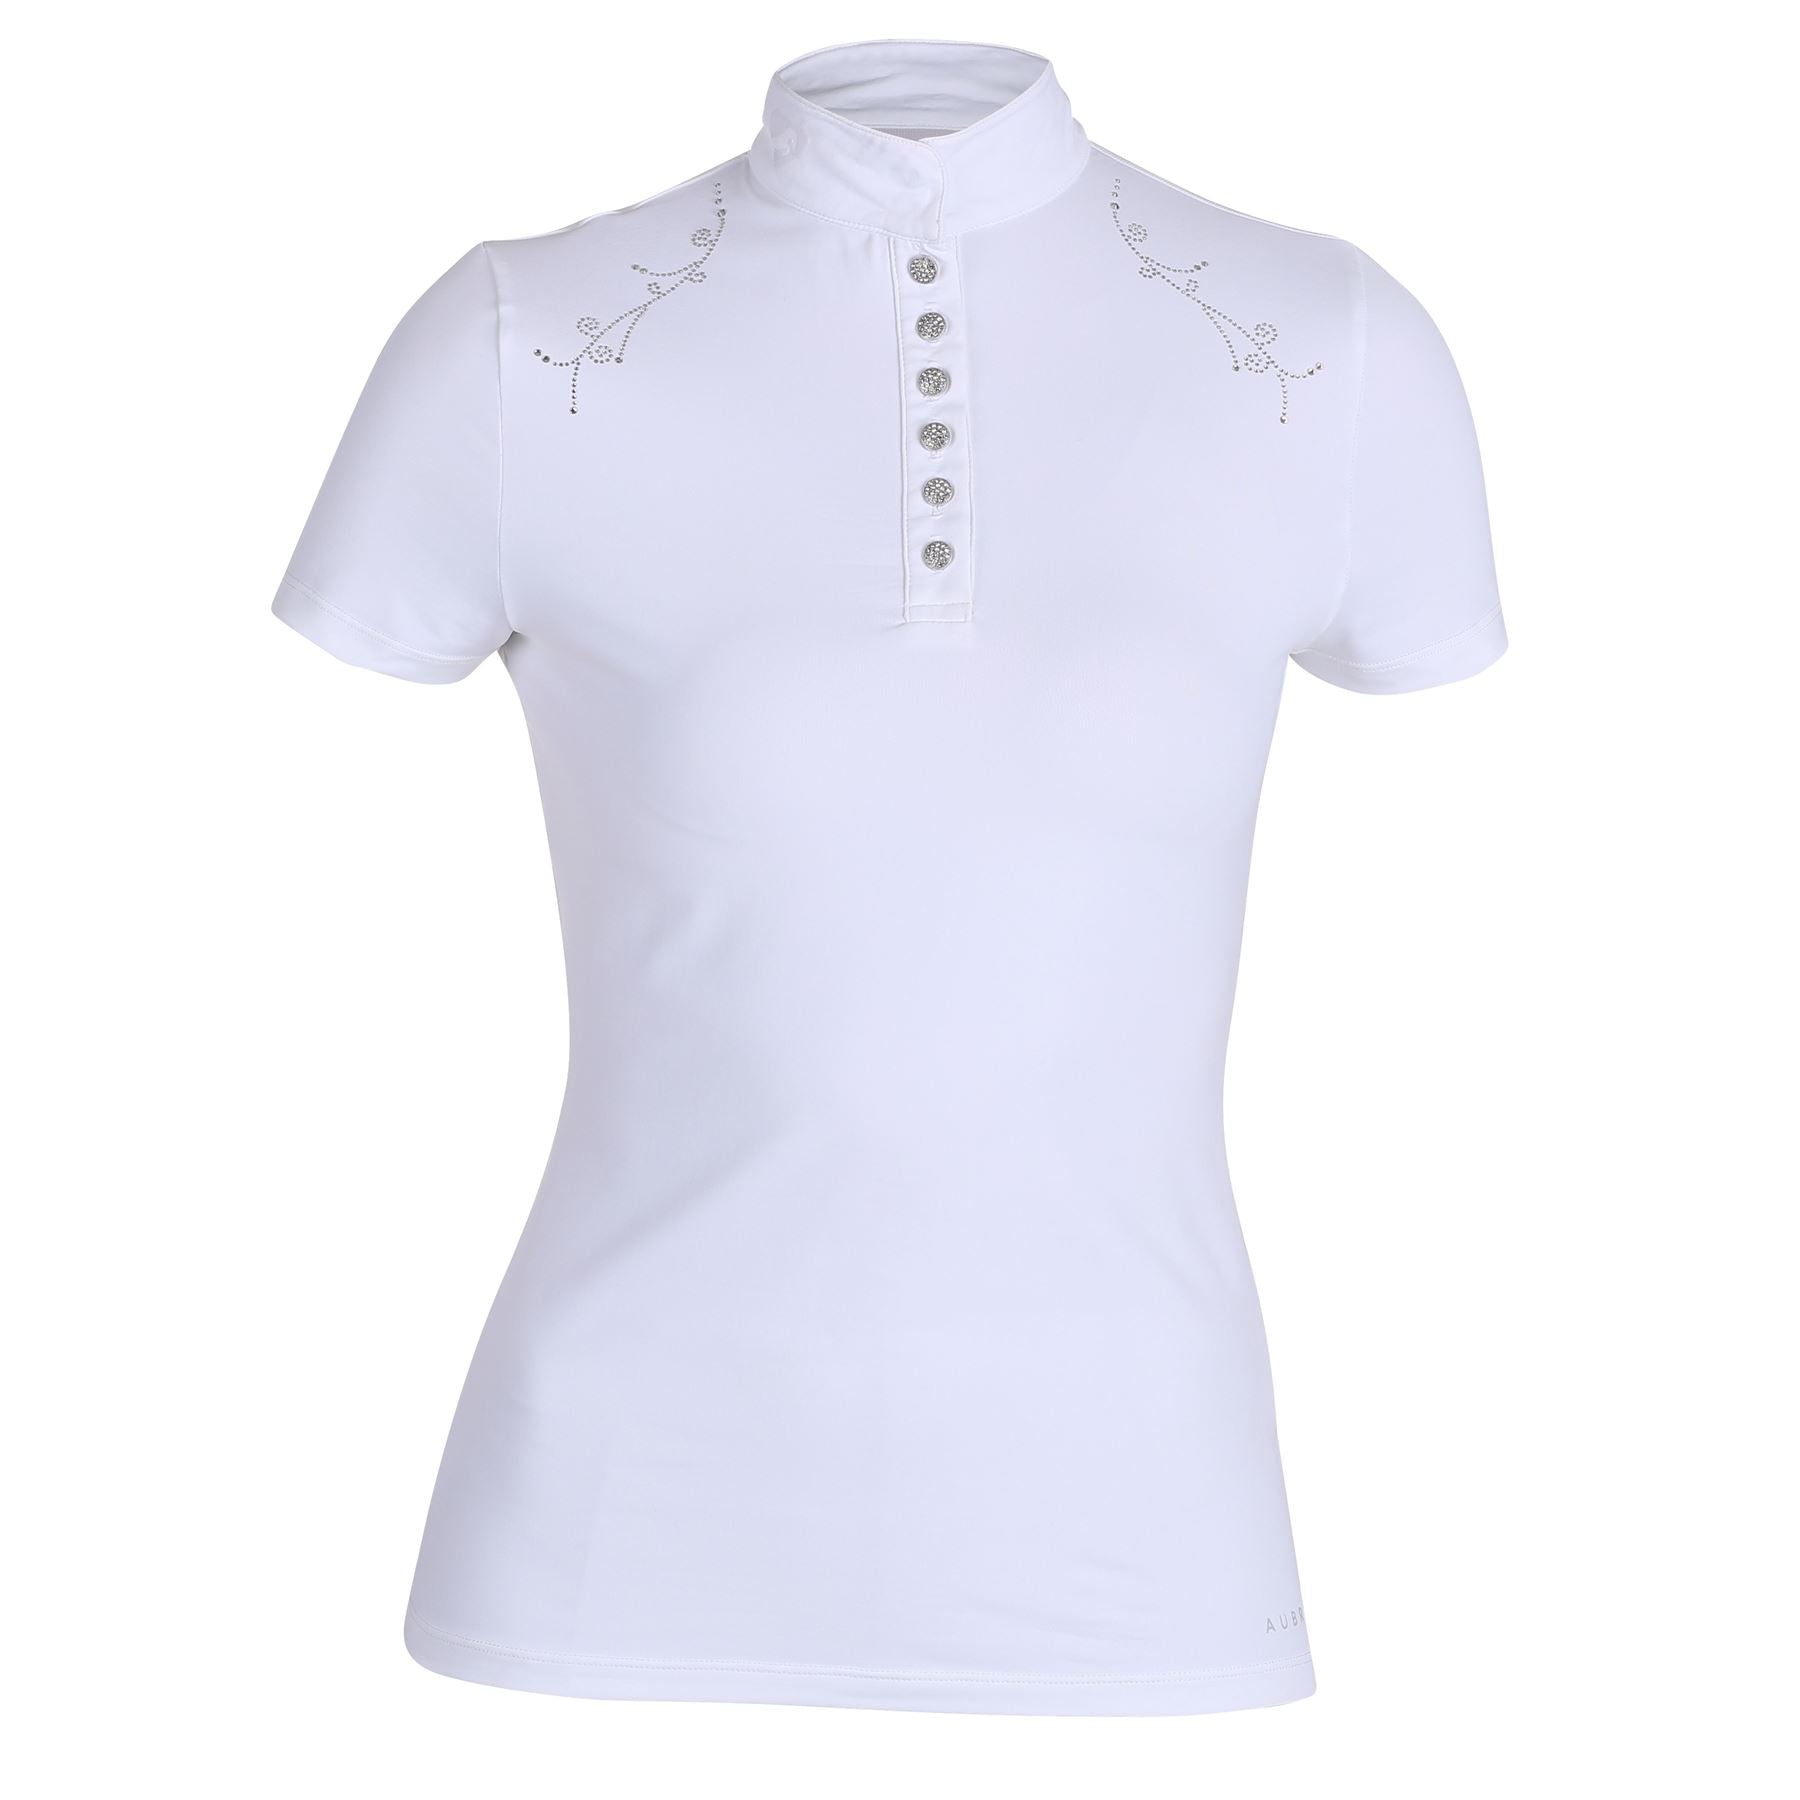 Aubrion Lincoln Show Shirt - Just Horse Riders